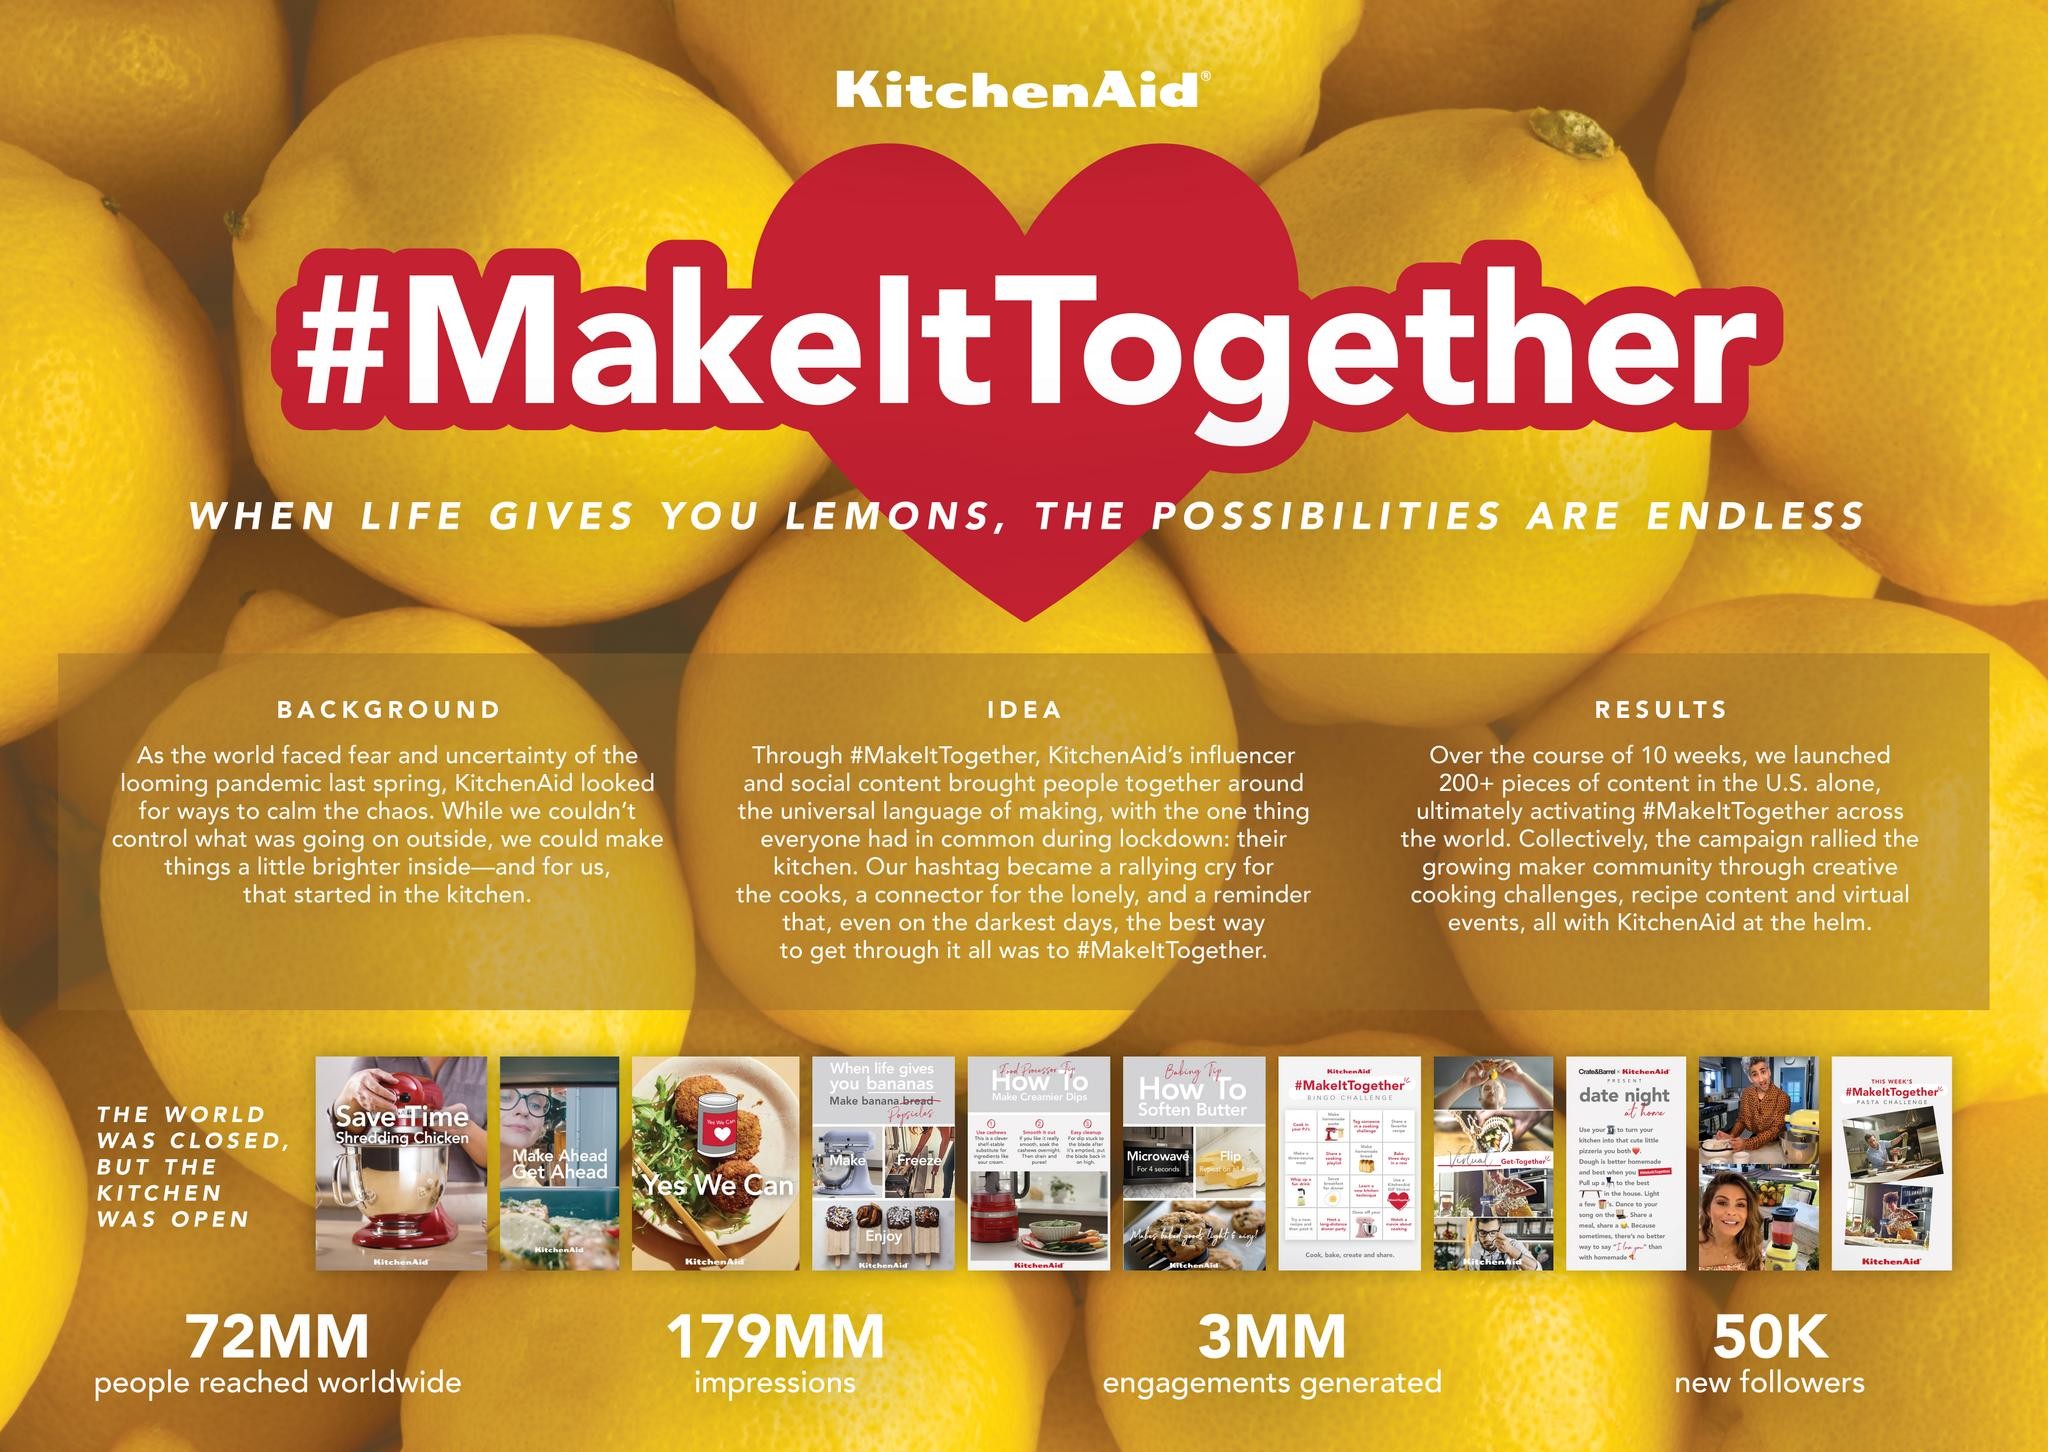 Inviting the world to #MakeItTogether